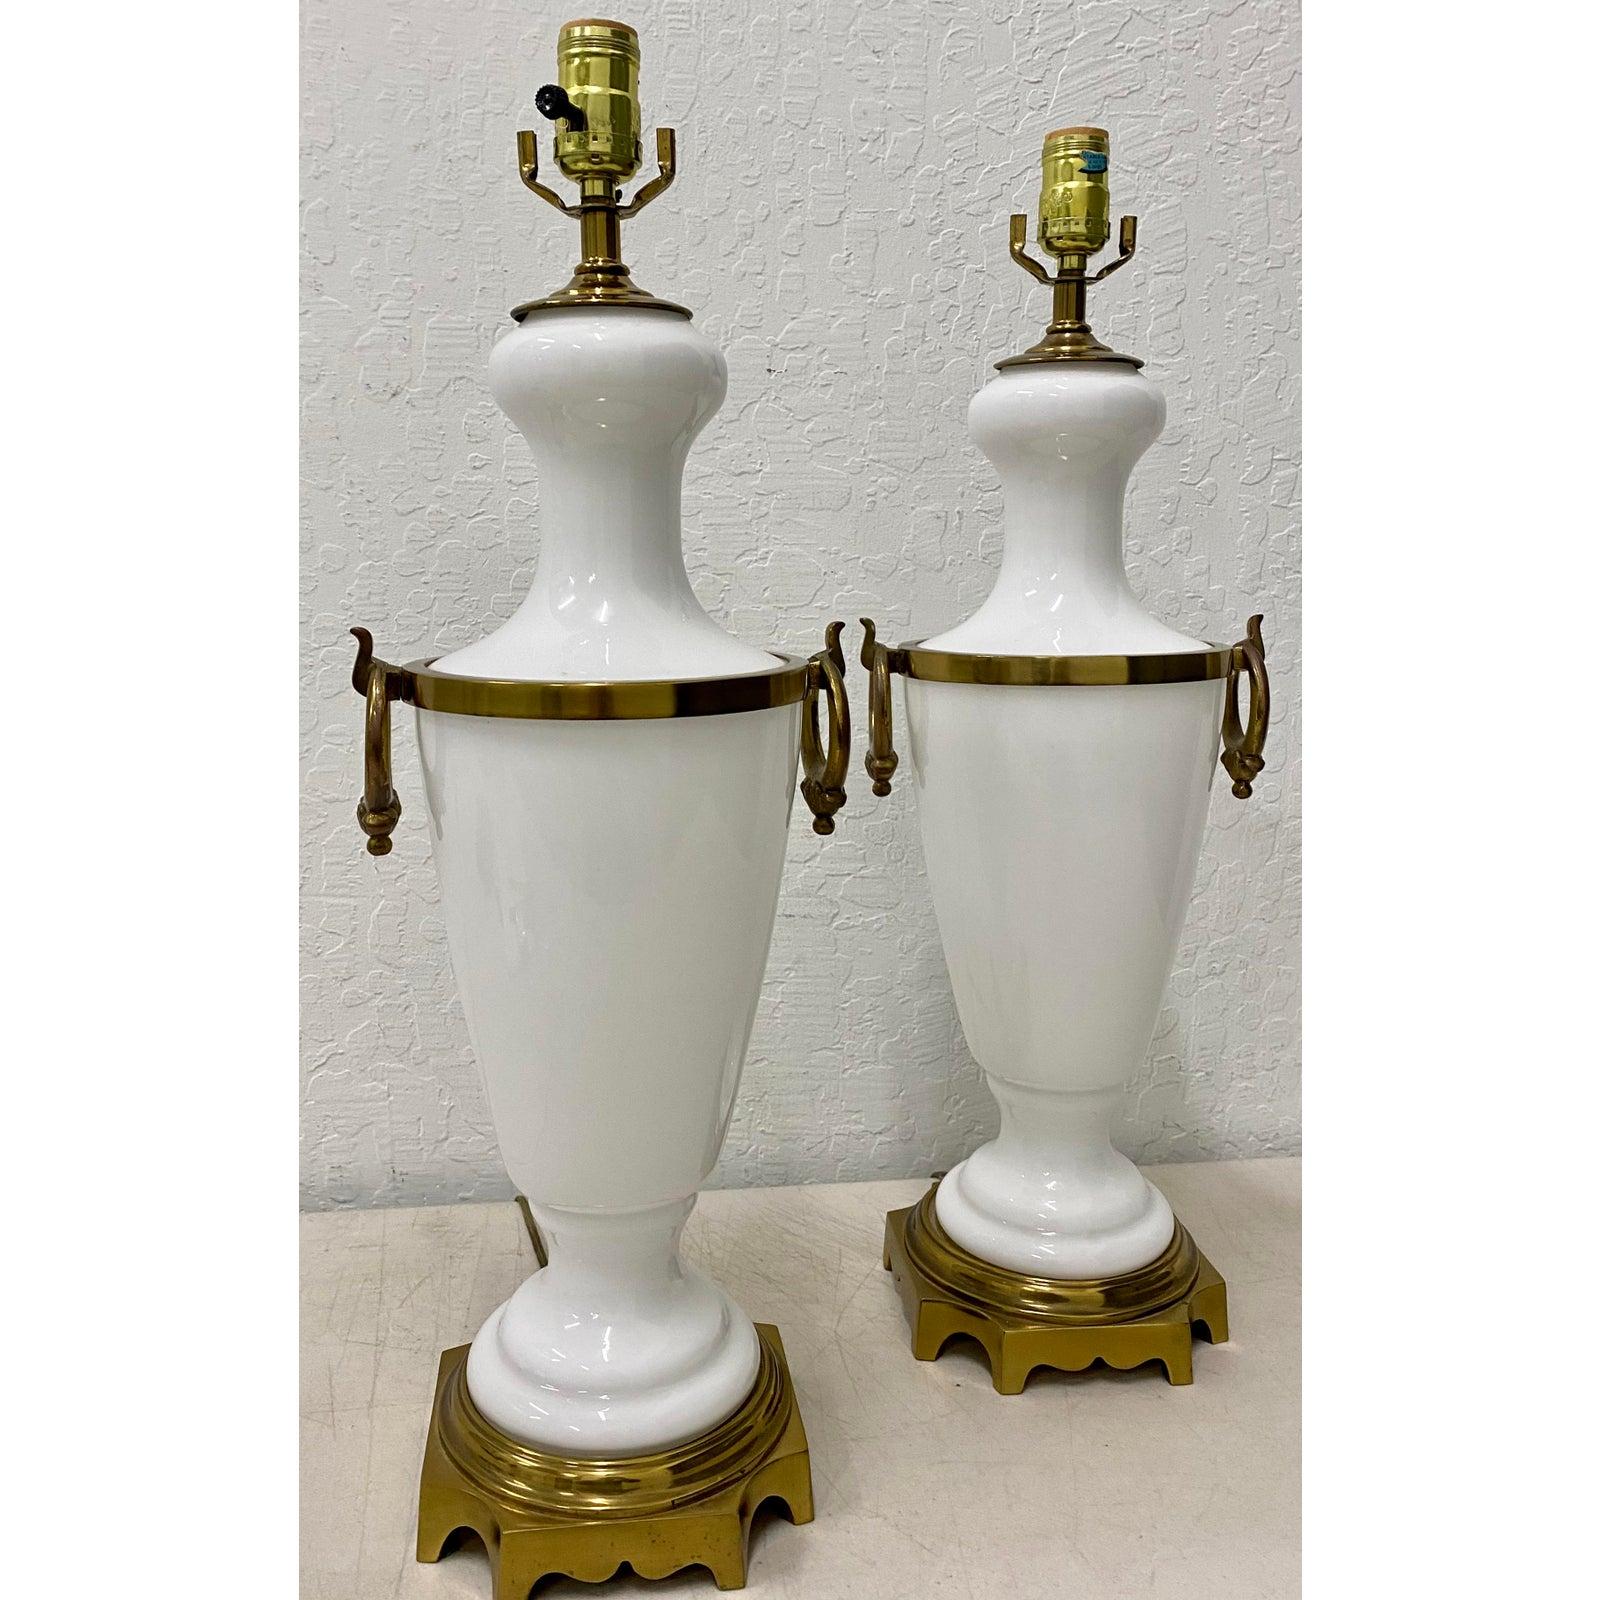 Pair of Hollywood Regency white glass with brass mounts table lamps, circa 1950

Gorgeous pair of vintage table lamps.

7